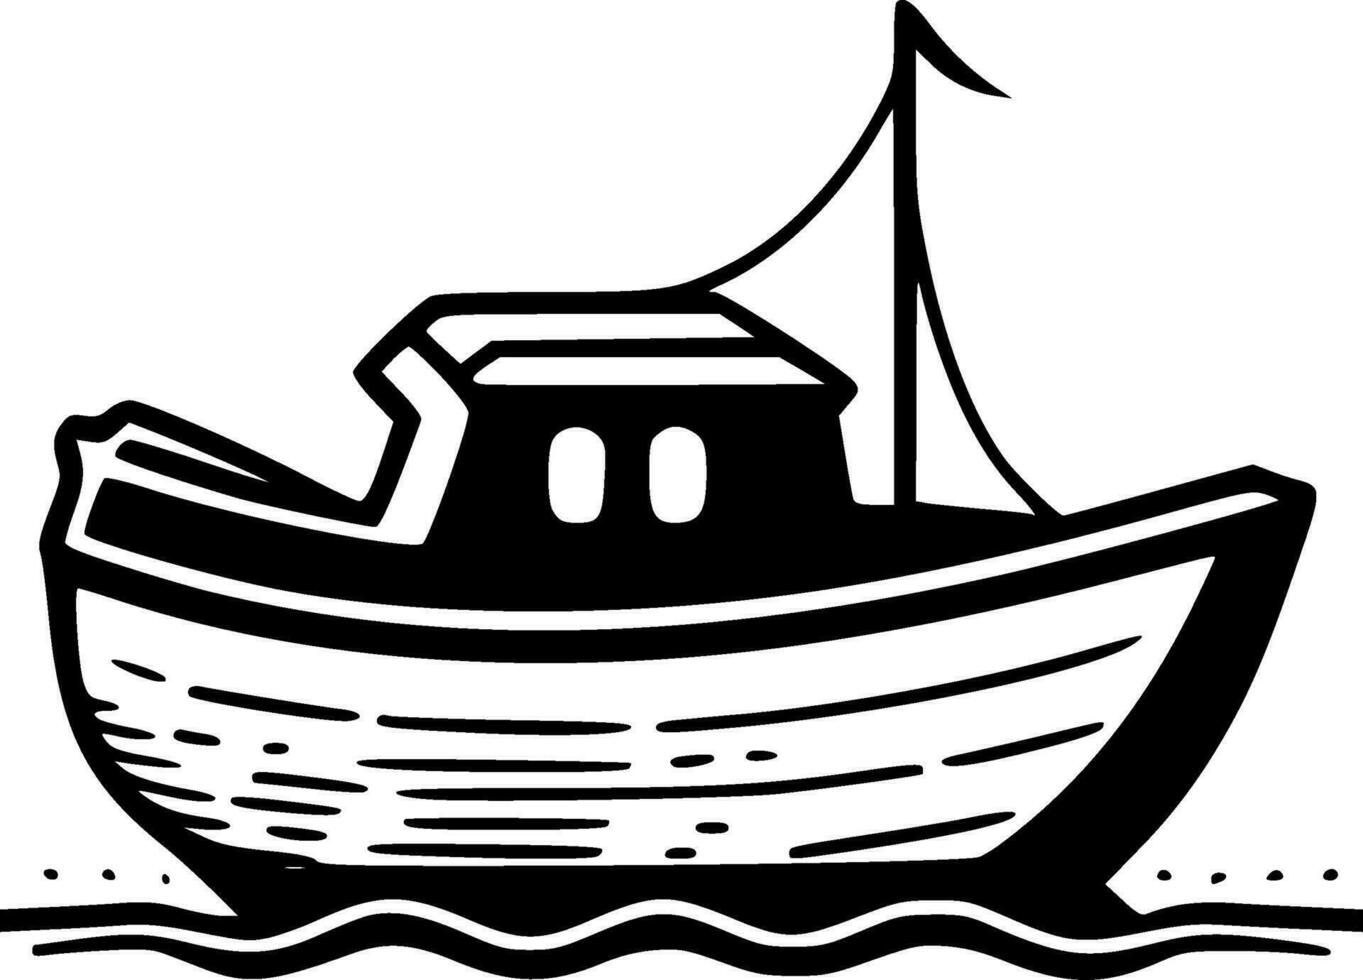 Boat, Minimalist and Simple Silhouette - Vector illustration